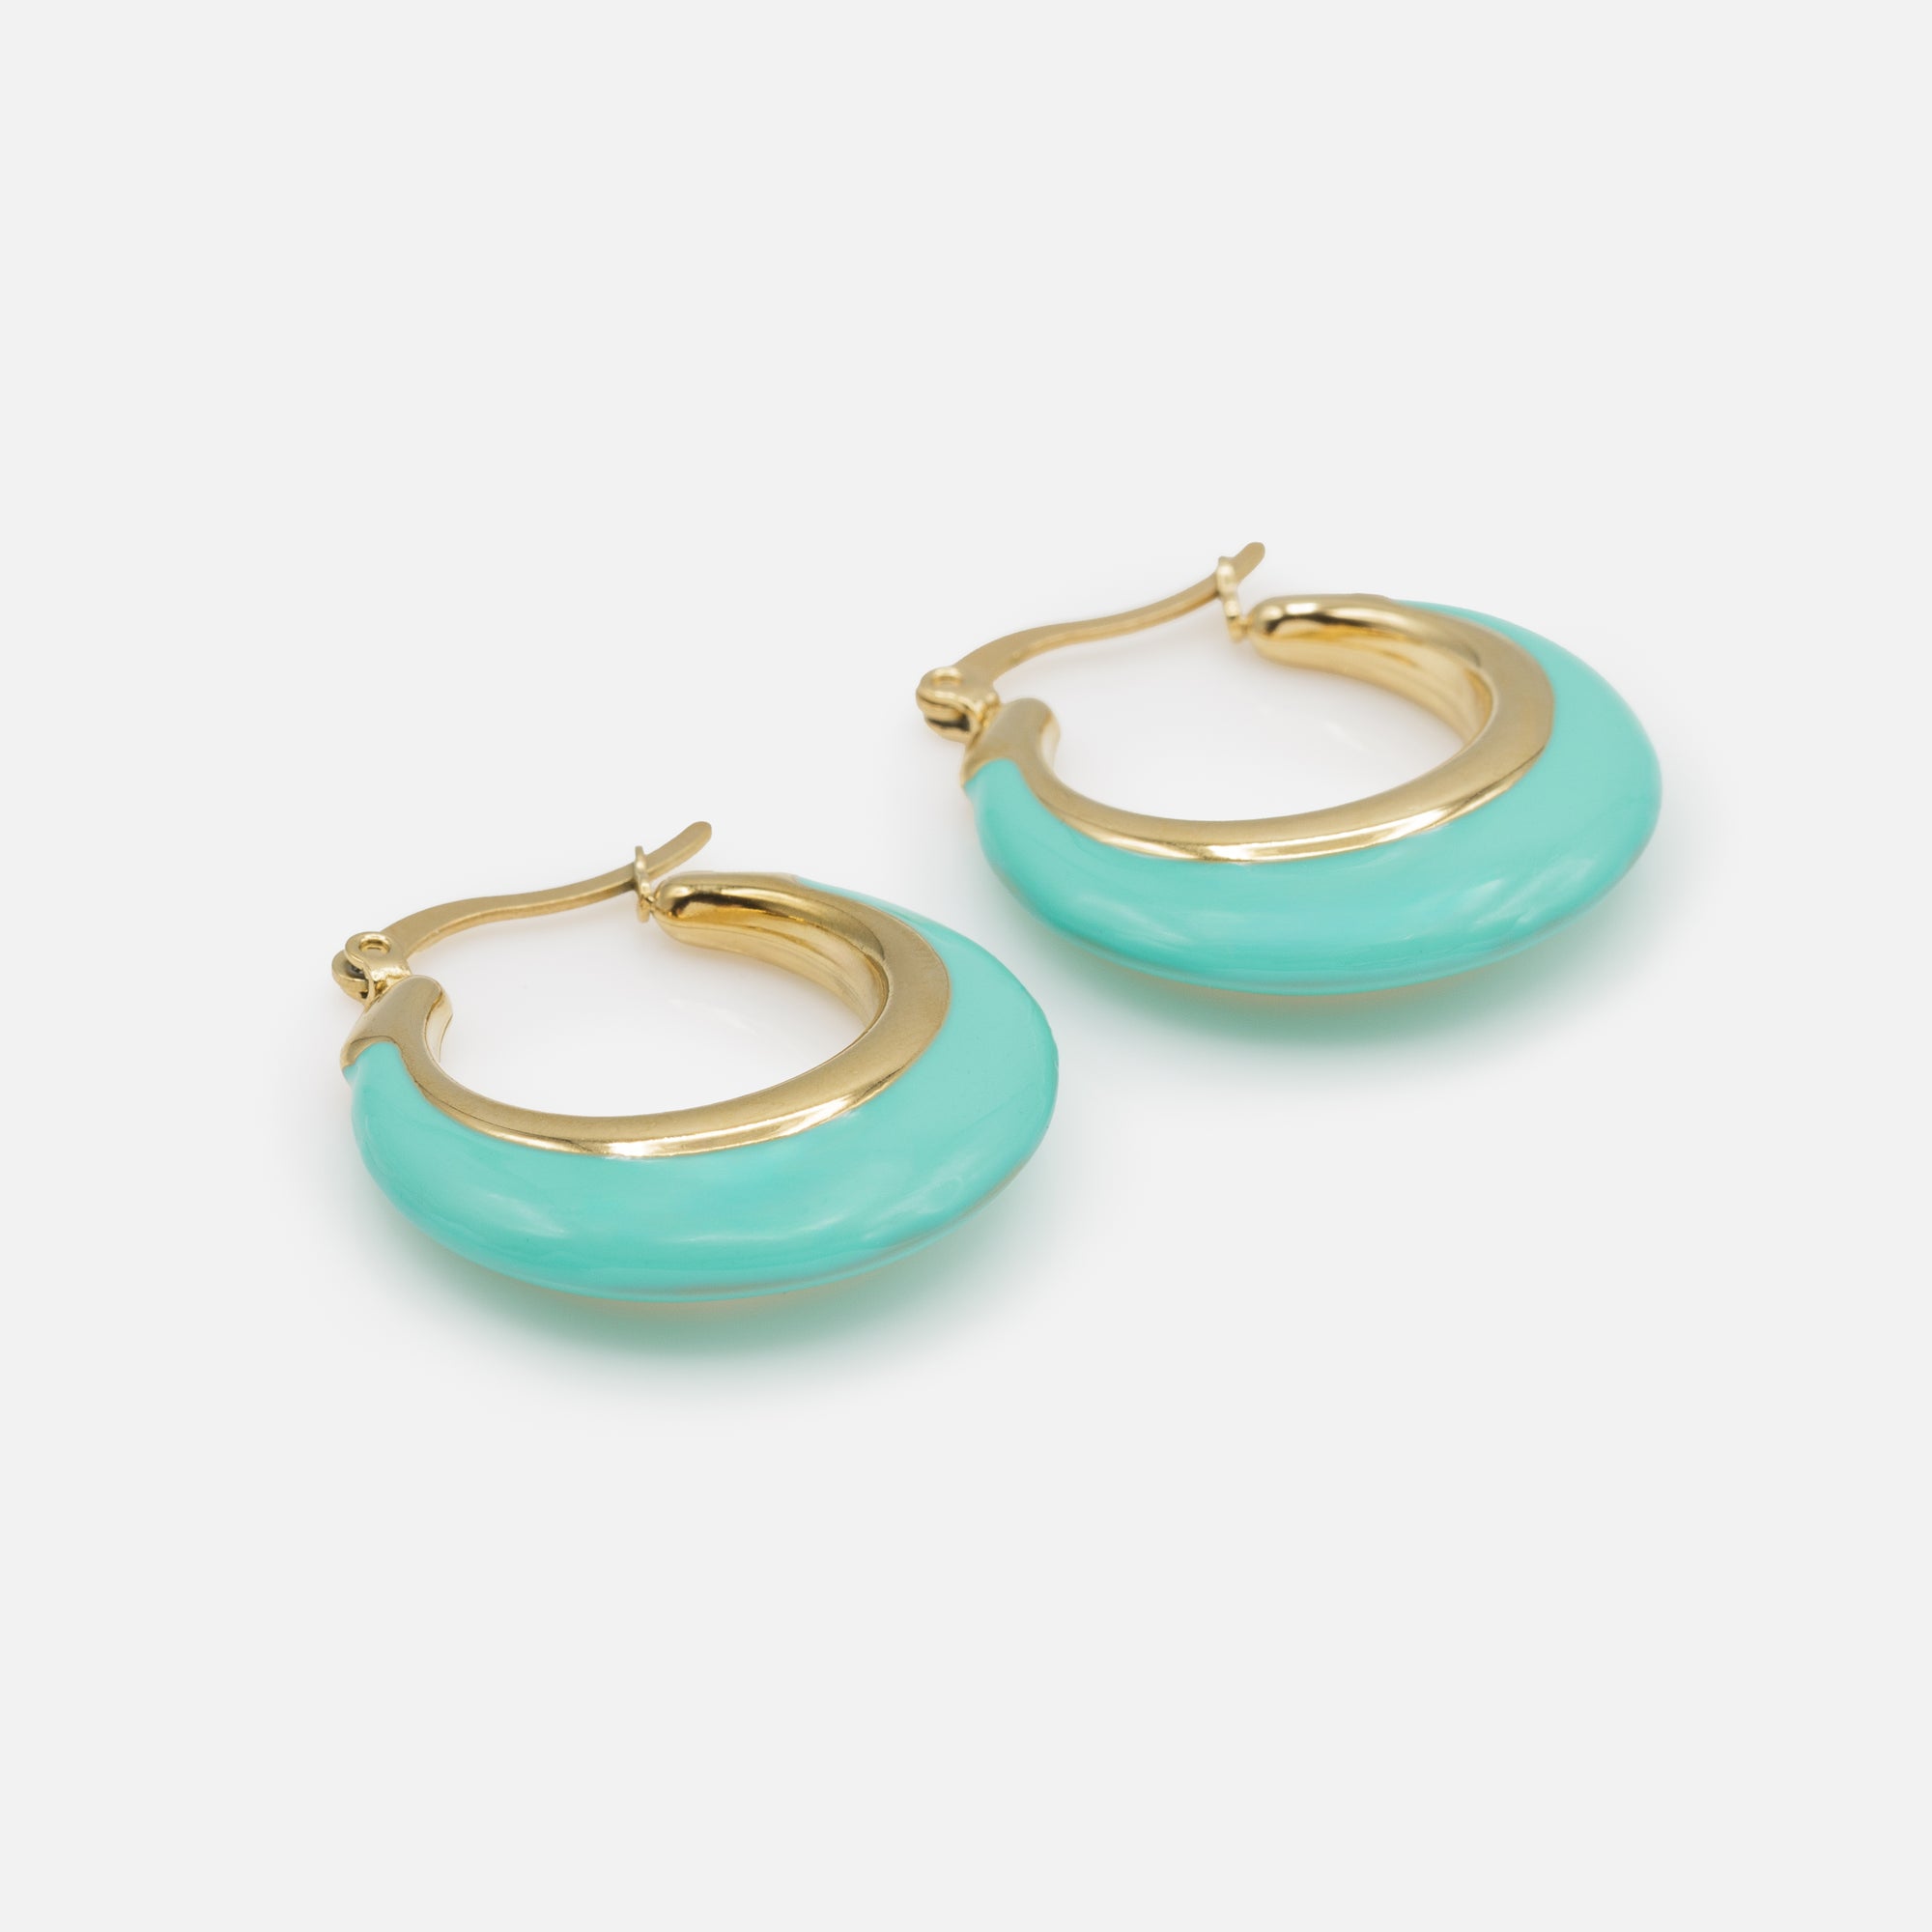 Gold hoop earrings with large turquoise base in stainless steel